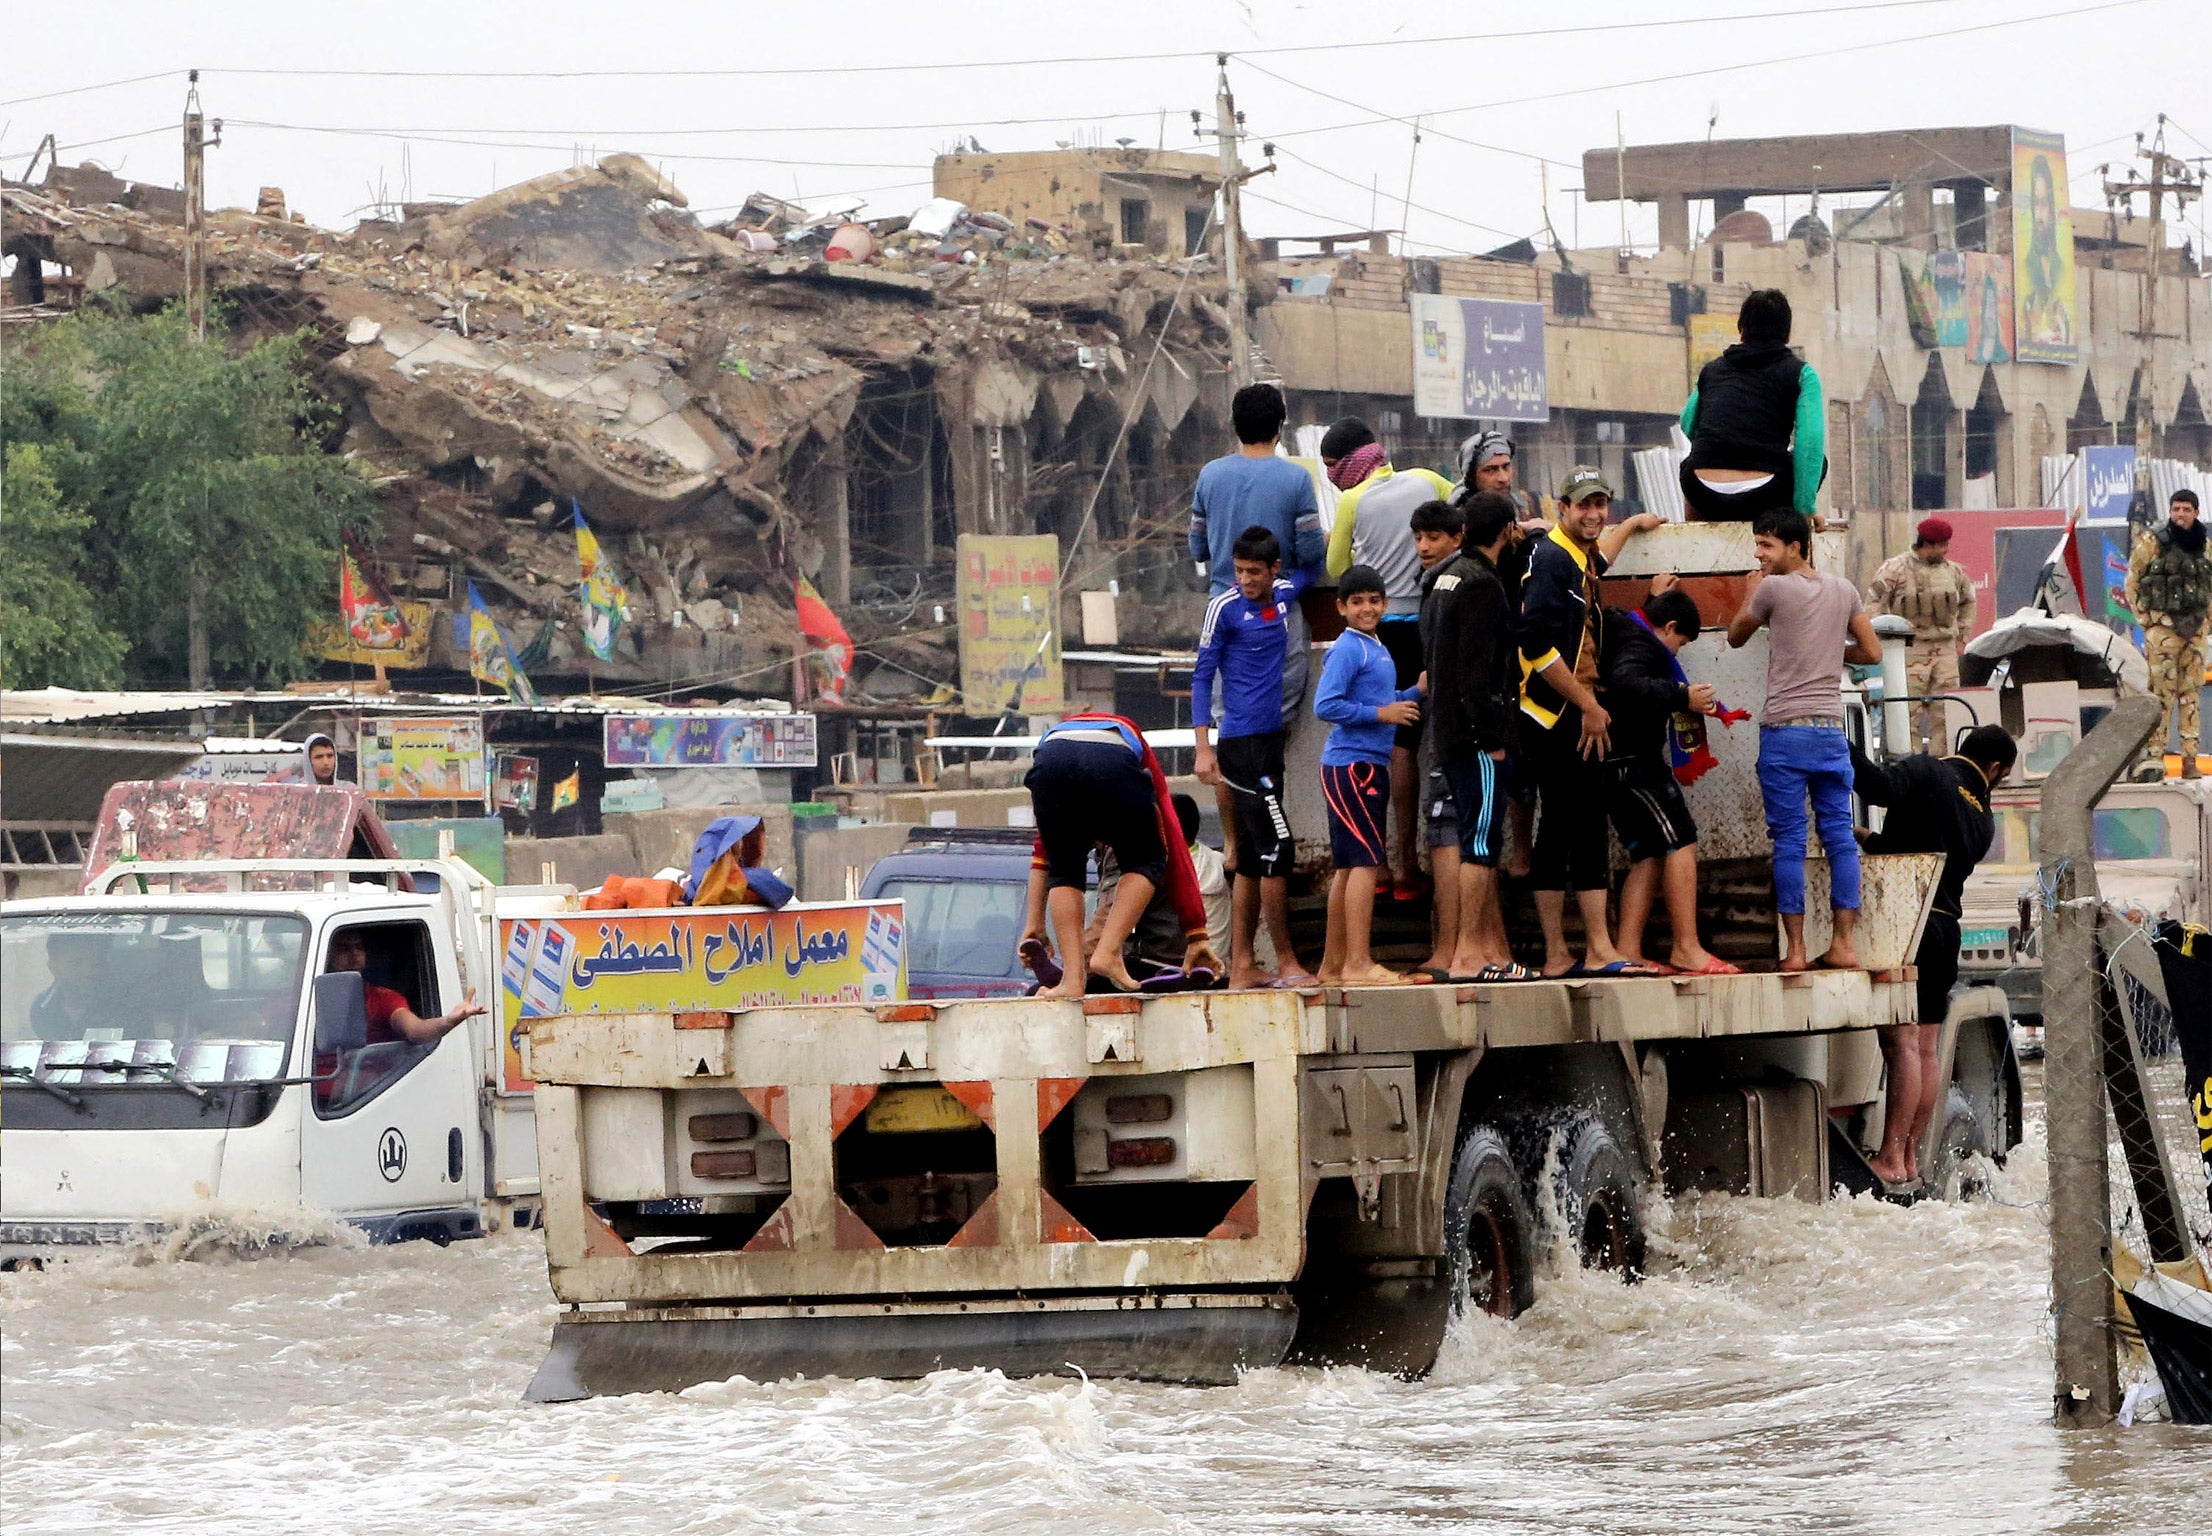 Iraqis make their way through the flooded streets of Baghdad after last week’s storm. Many people have criticised the response from central and provincial authorities